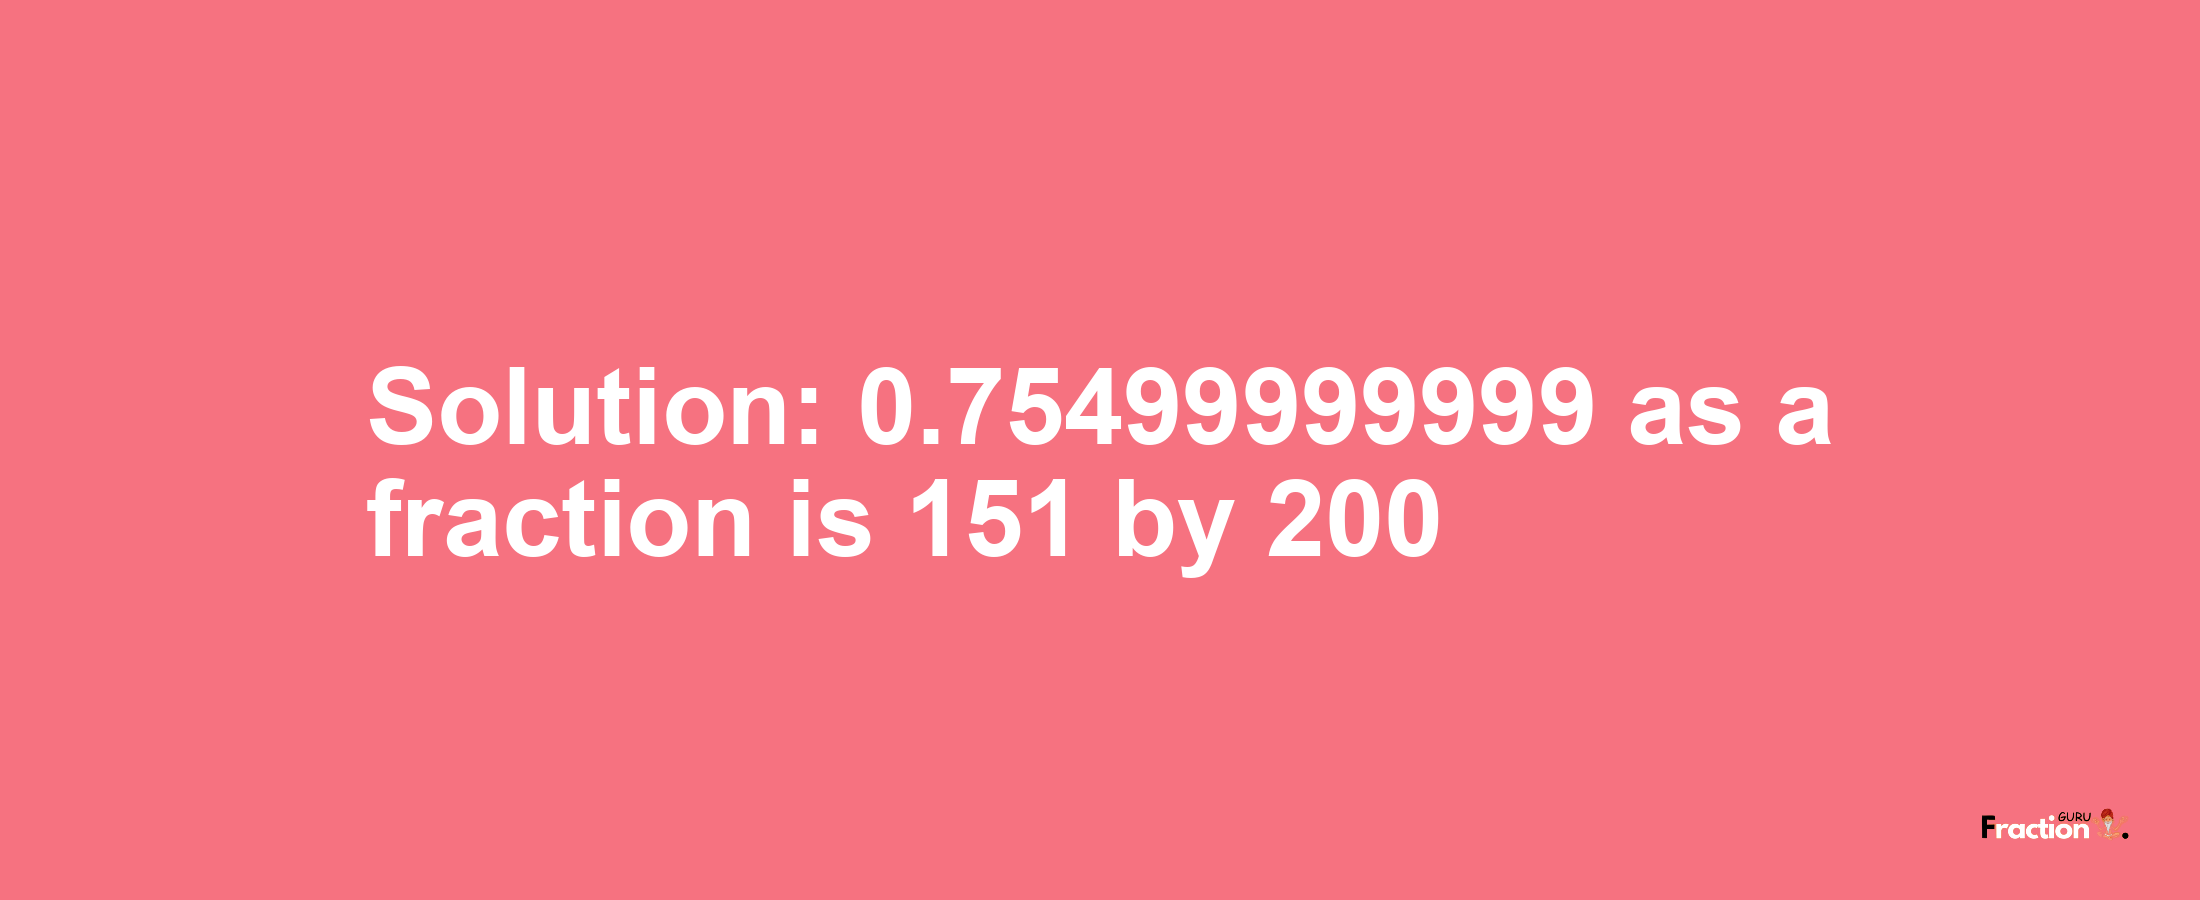 Solution:0.75499999999 as a fraction is 151/200